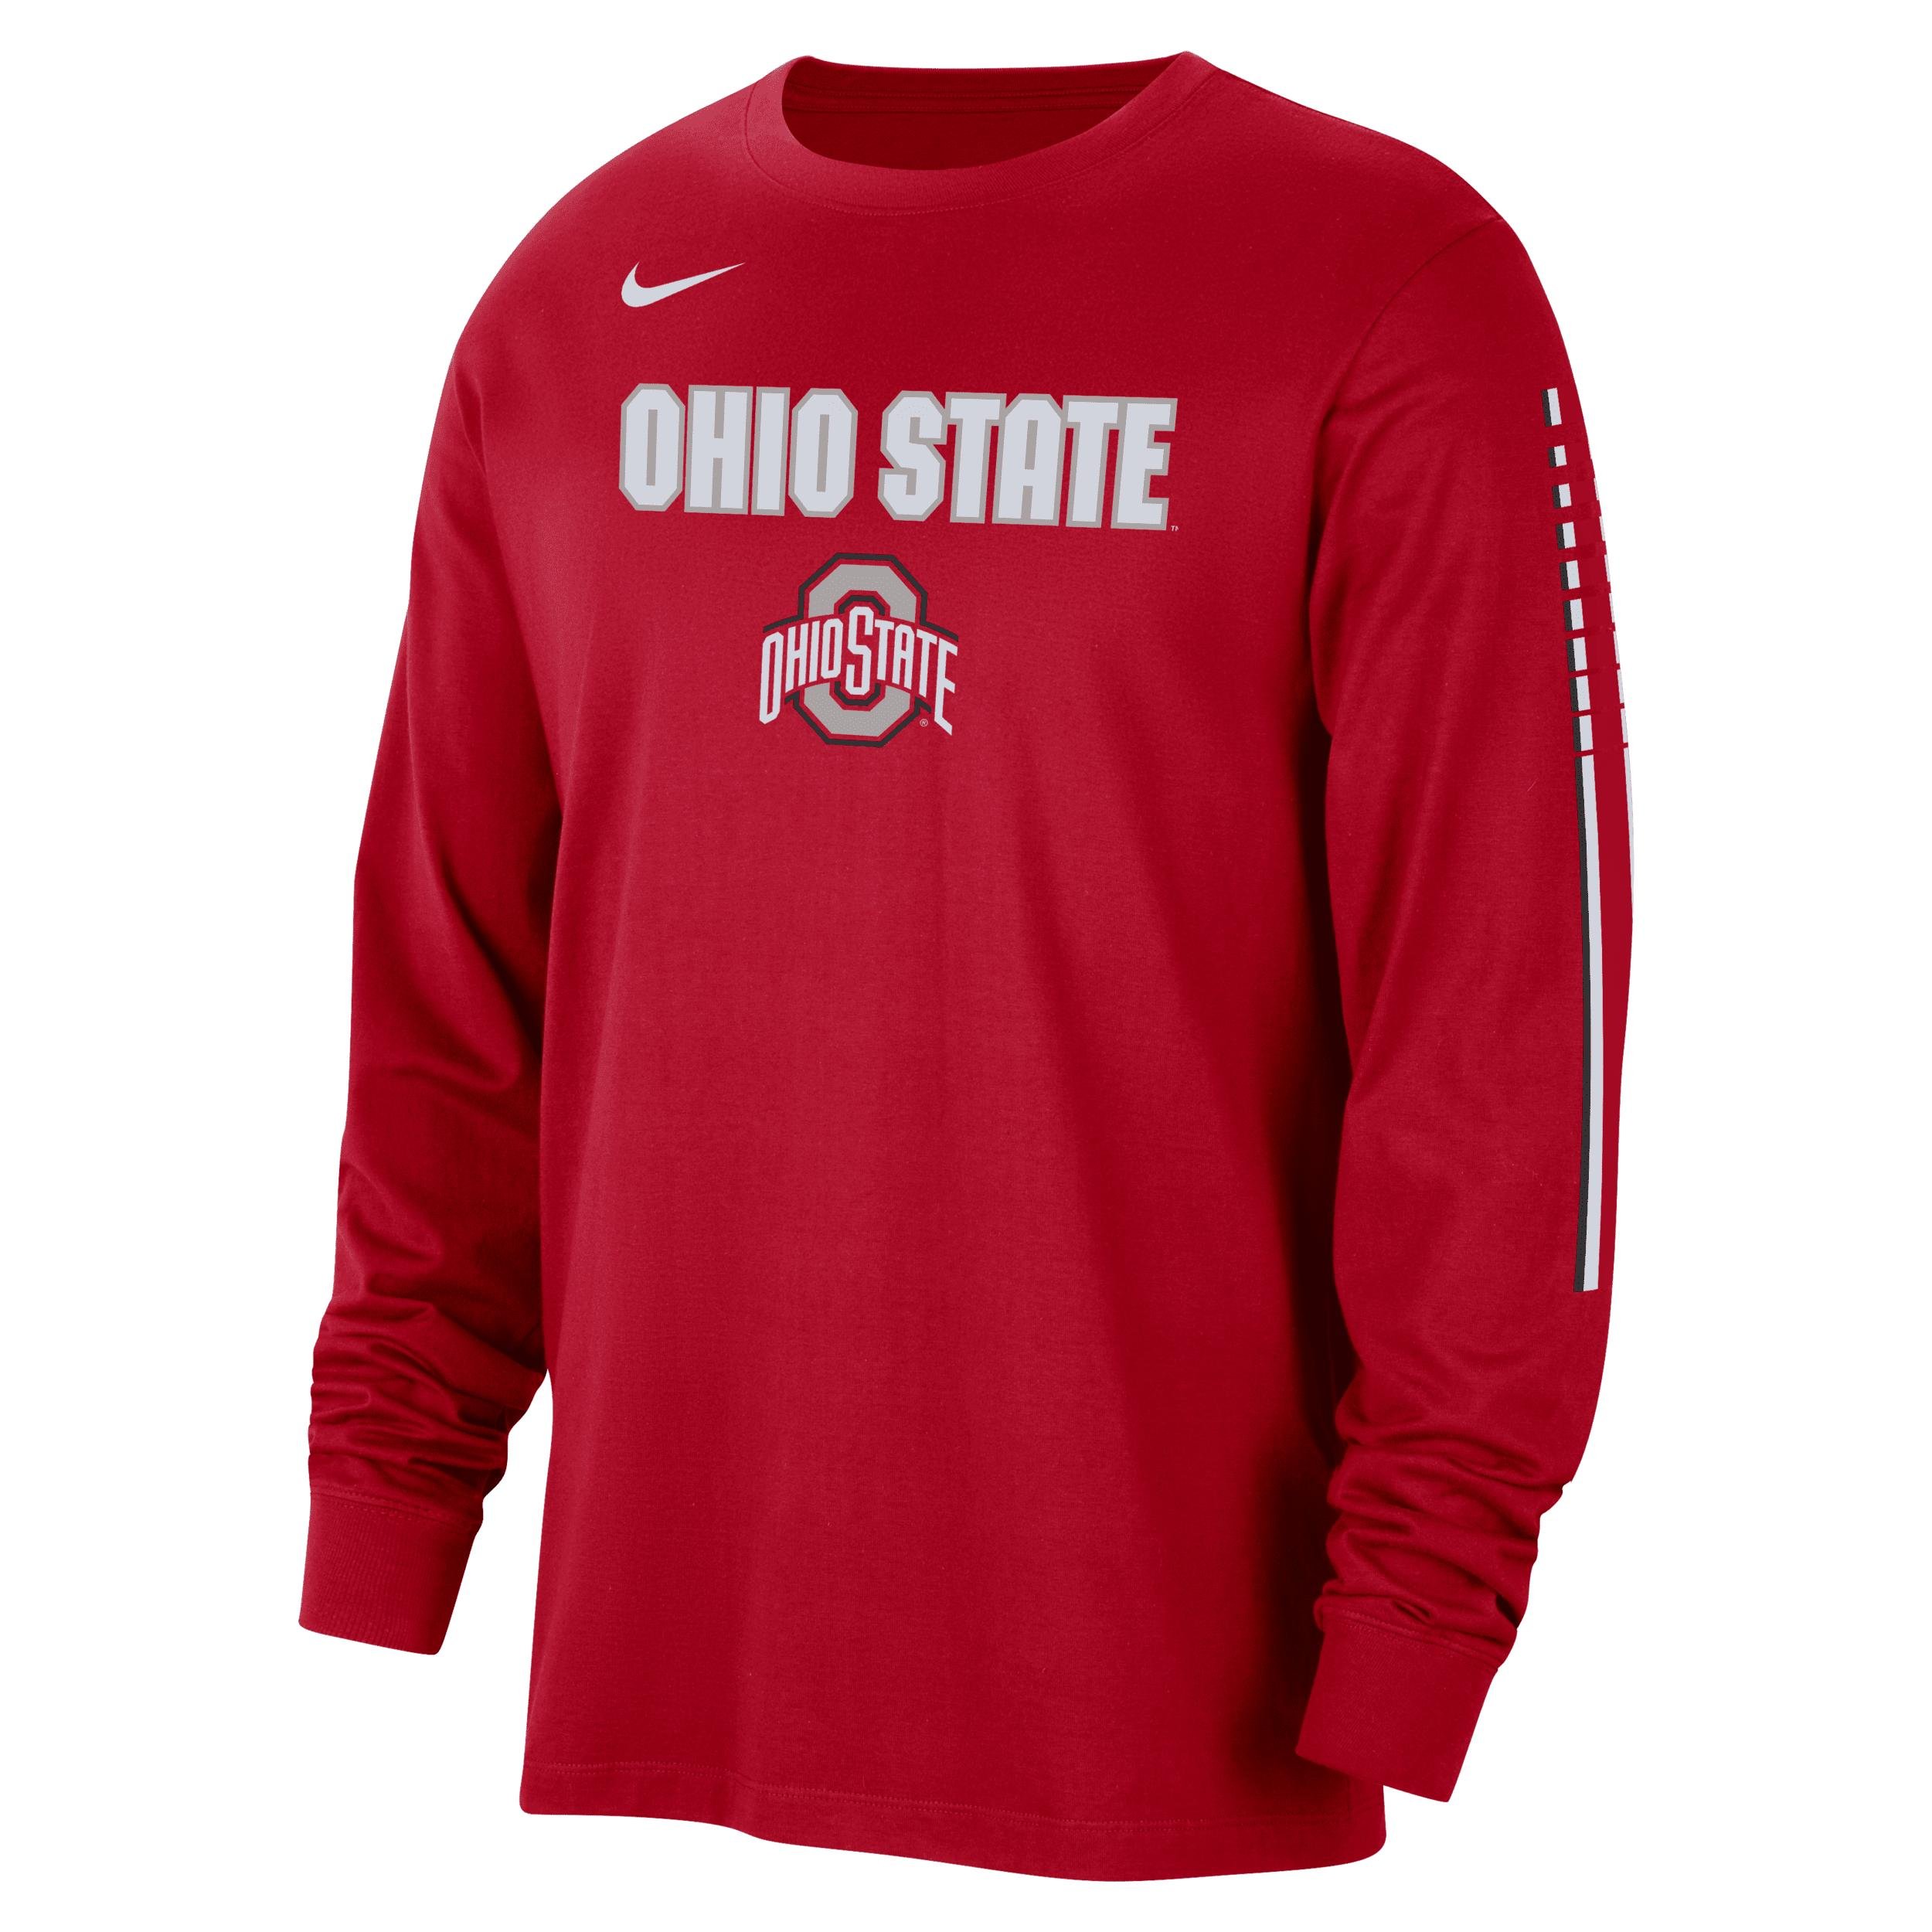 Ohio State Nike Men's College Long-Sleeve T-Shirt by NIKE